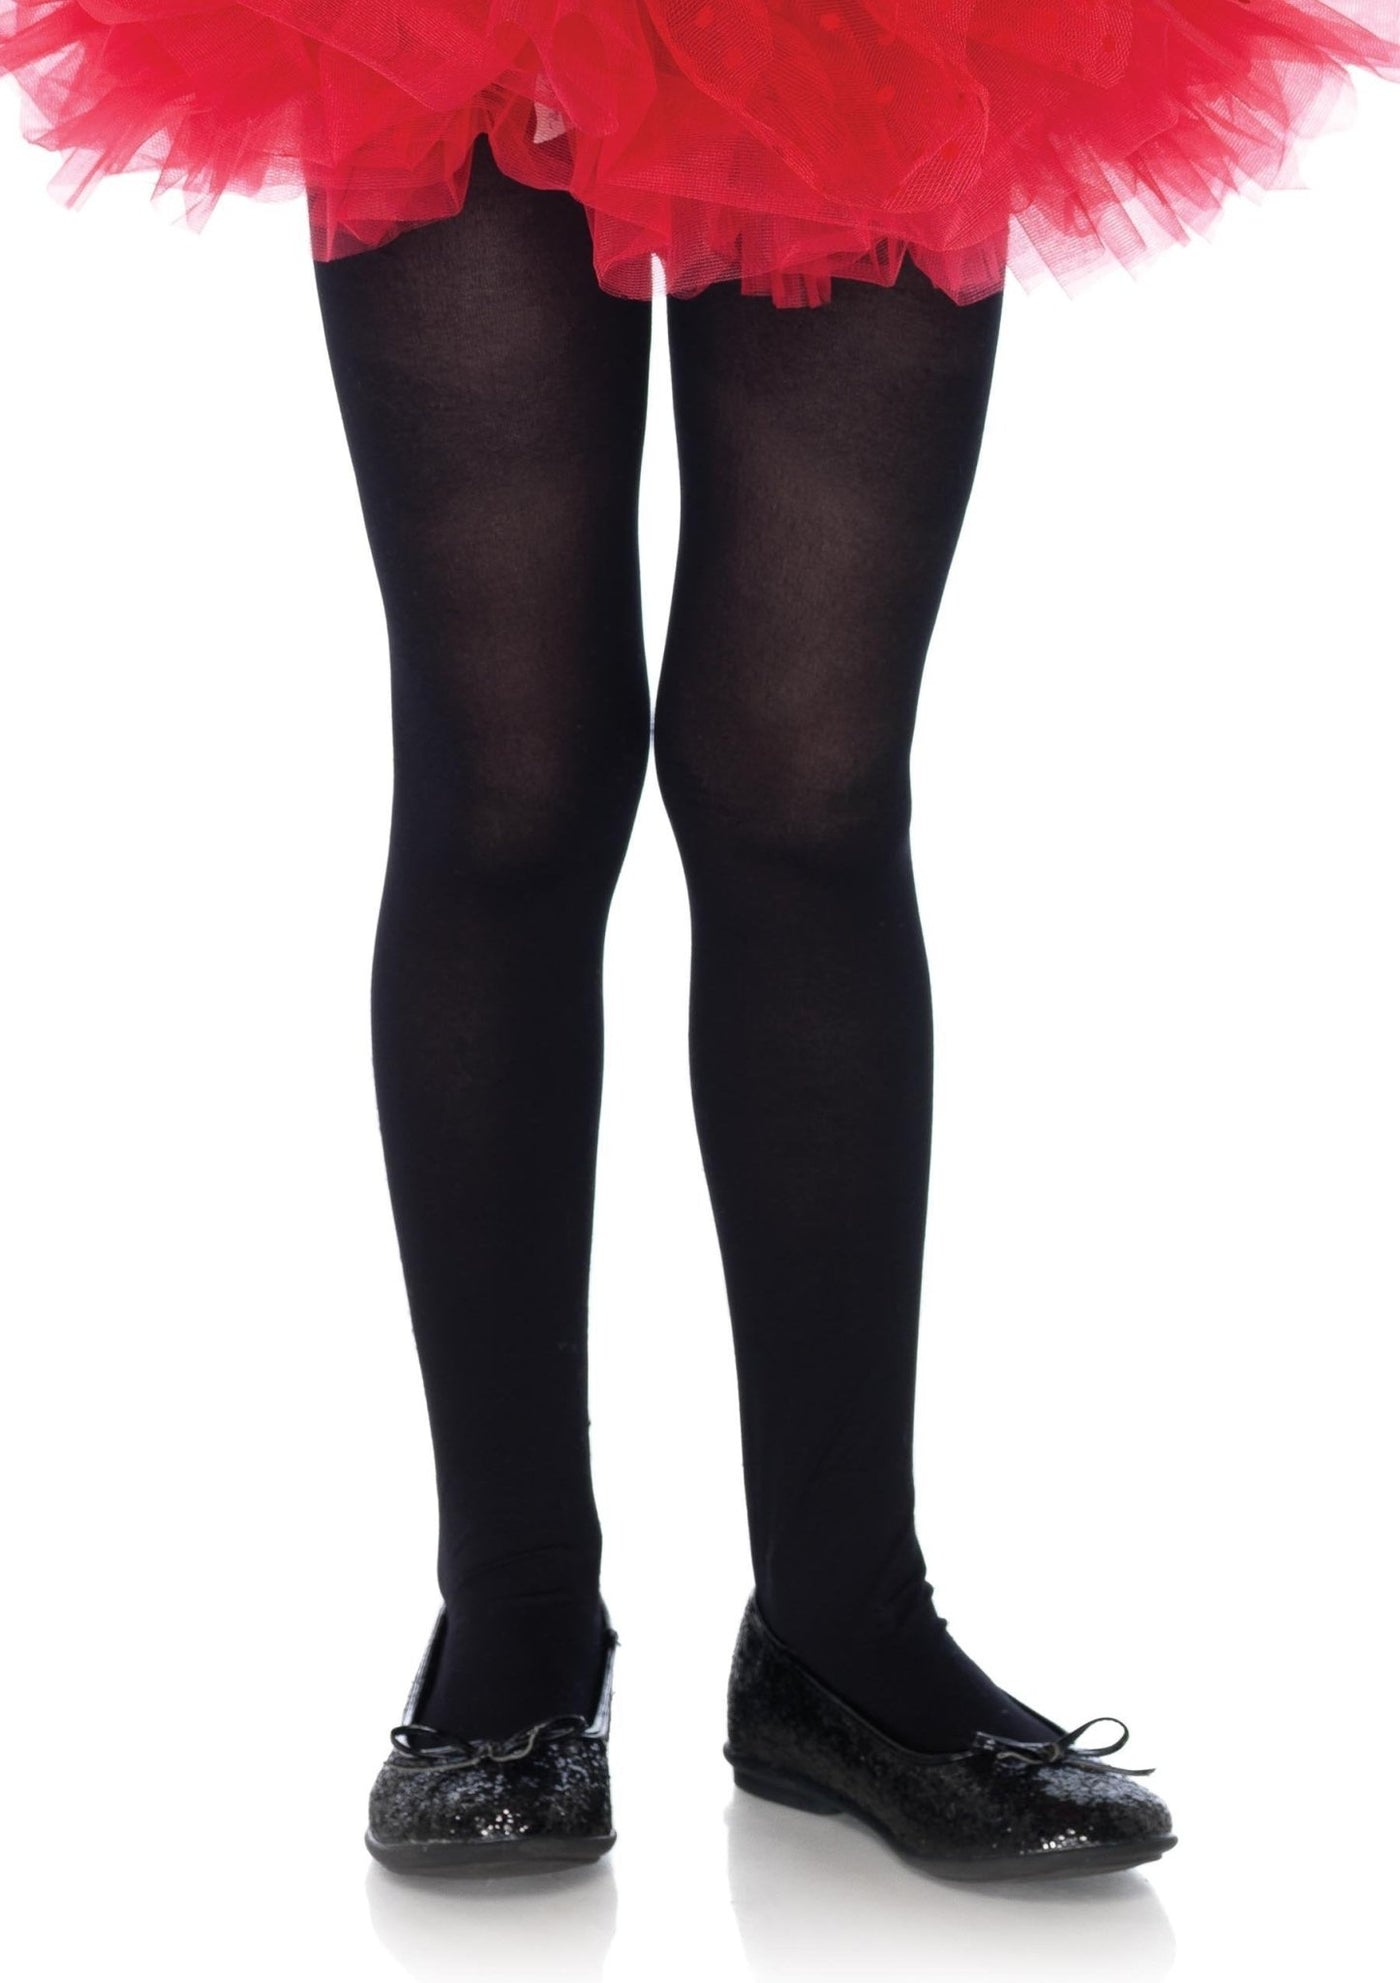 Girls Opaque Tights LEG-4646 NEON PINK 7-10 - JJ's Party House